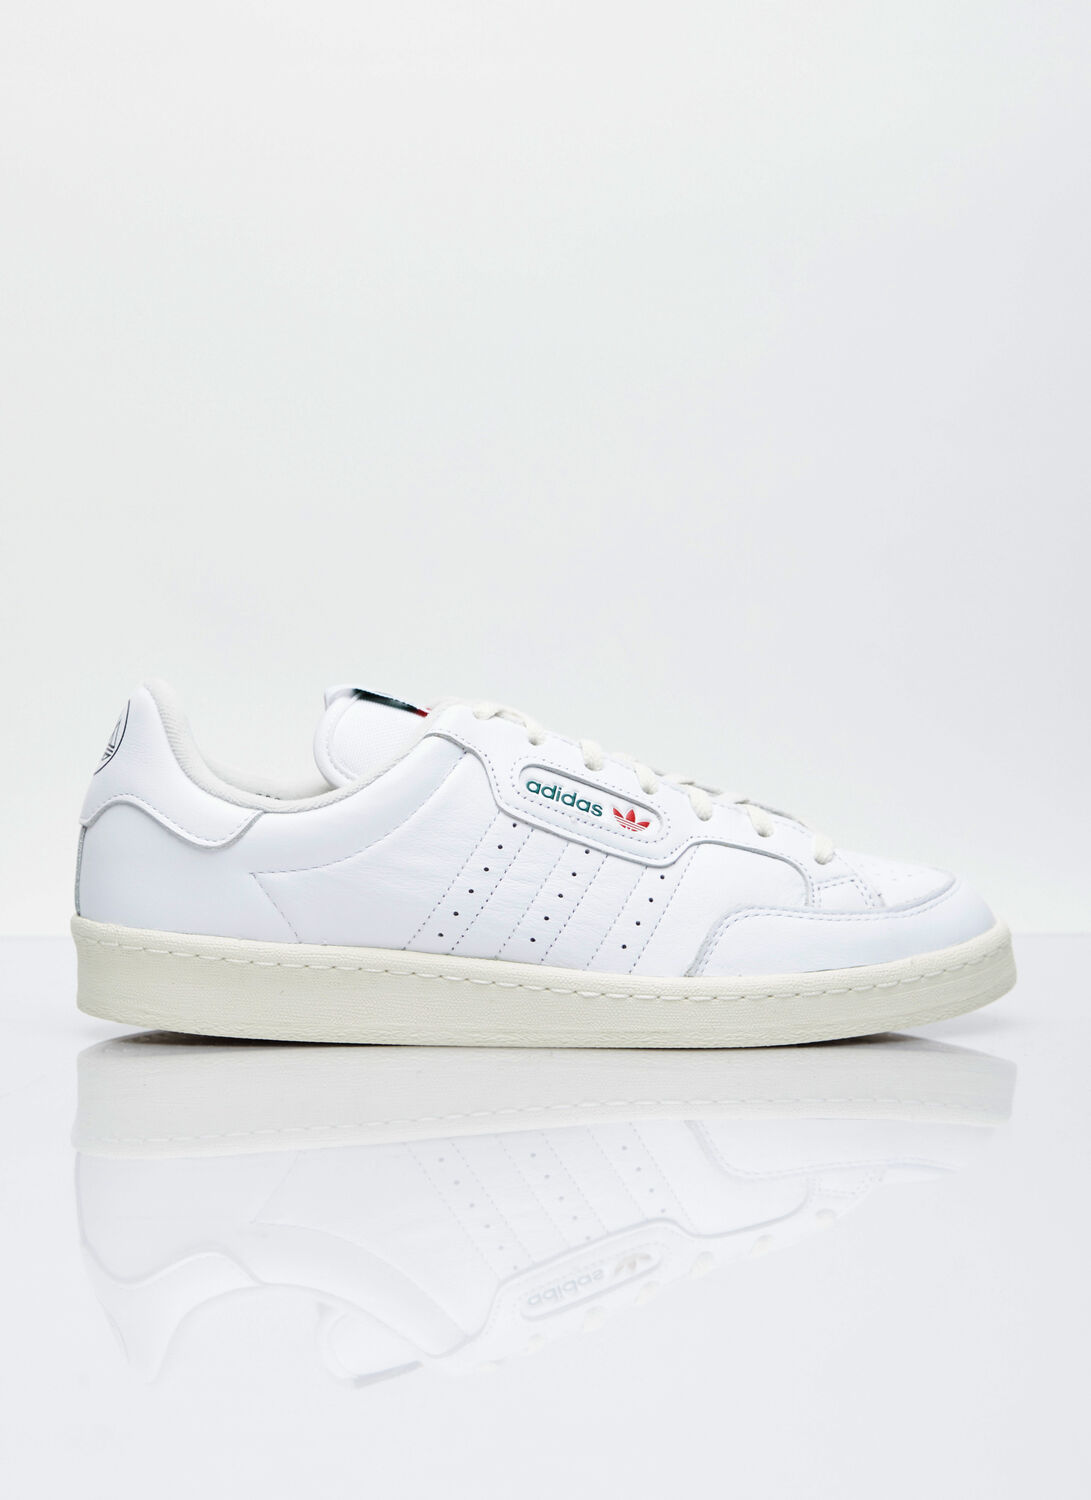 Adidas Originals By Spezial Englewood Spezial Trainers In White